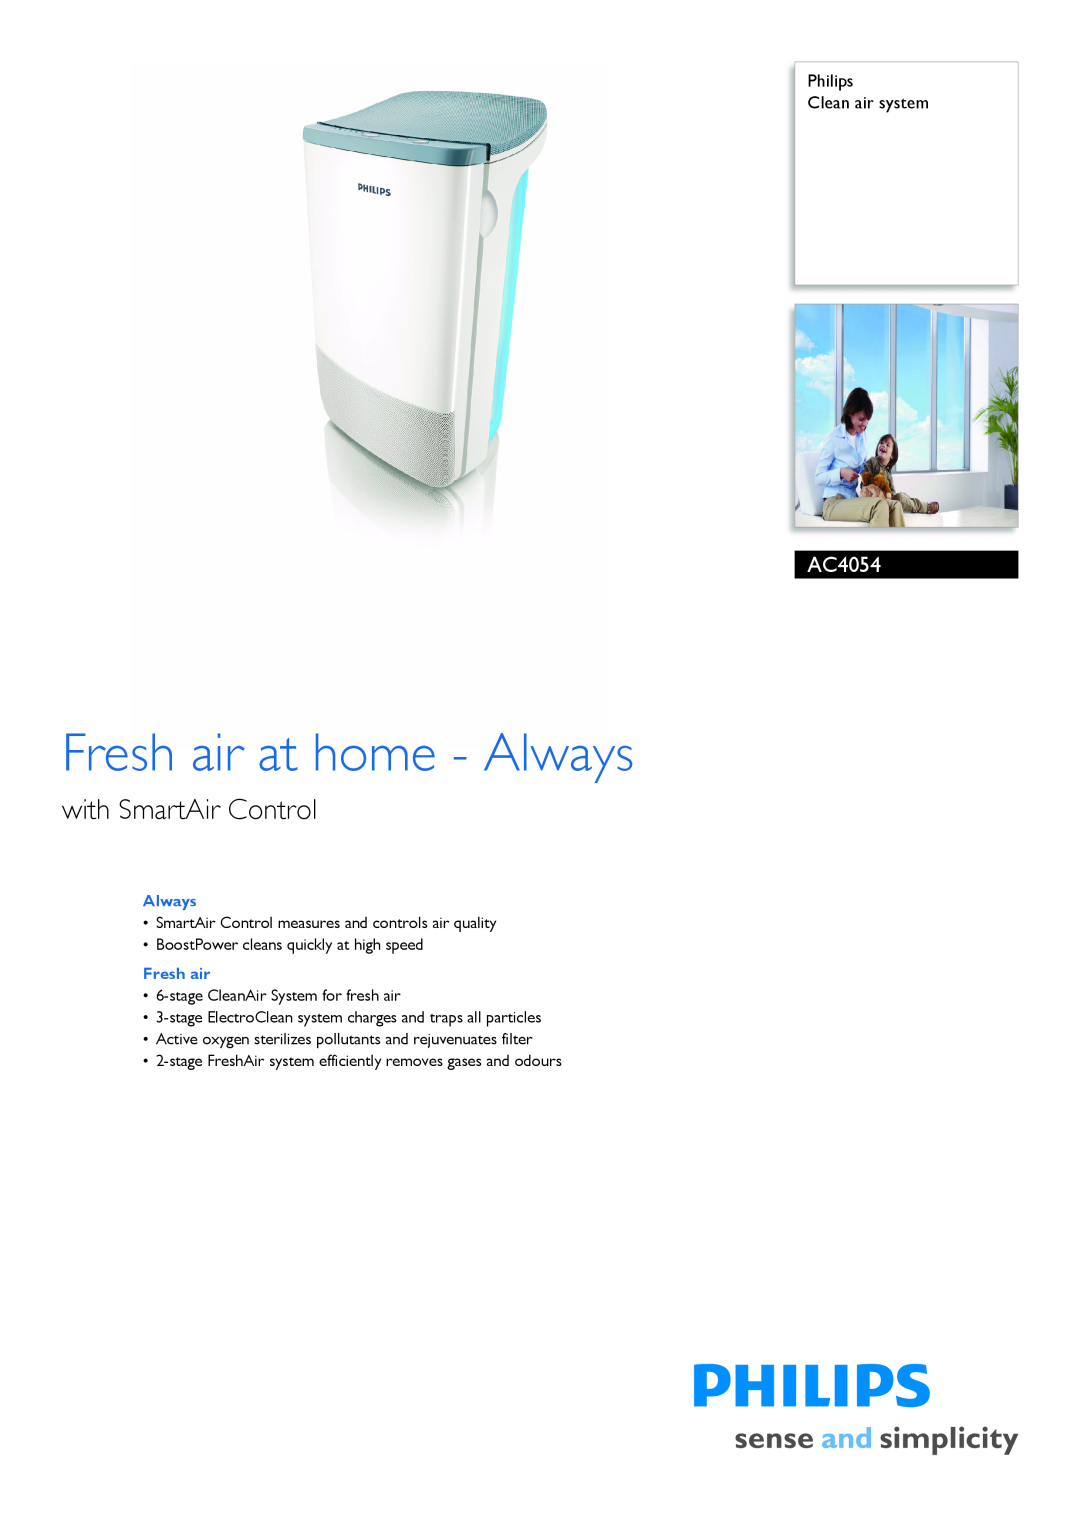 Philips AC4054/00 manual Philips Clean air system, Fresh air at home - Always, with SmartAir Control 